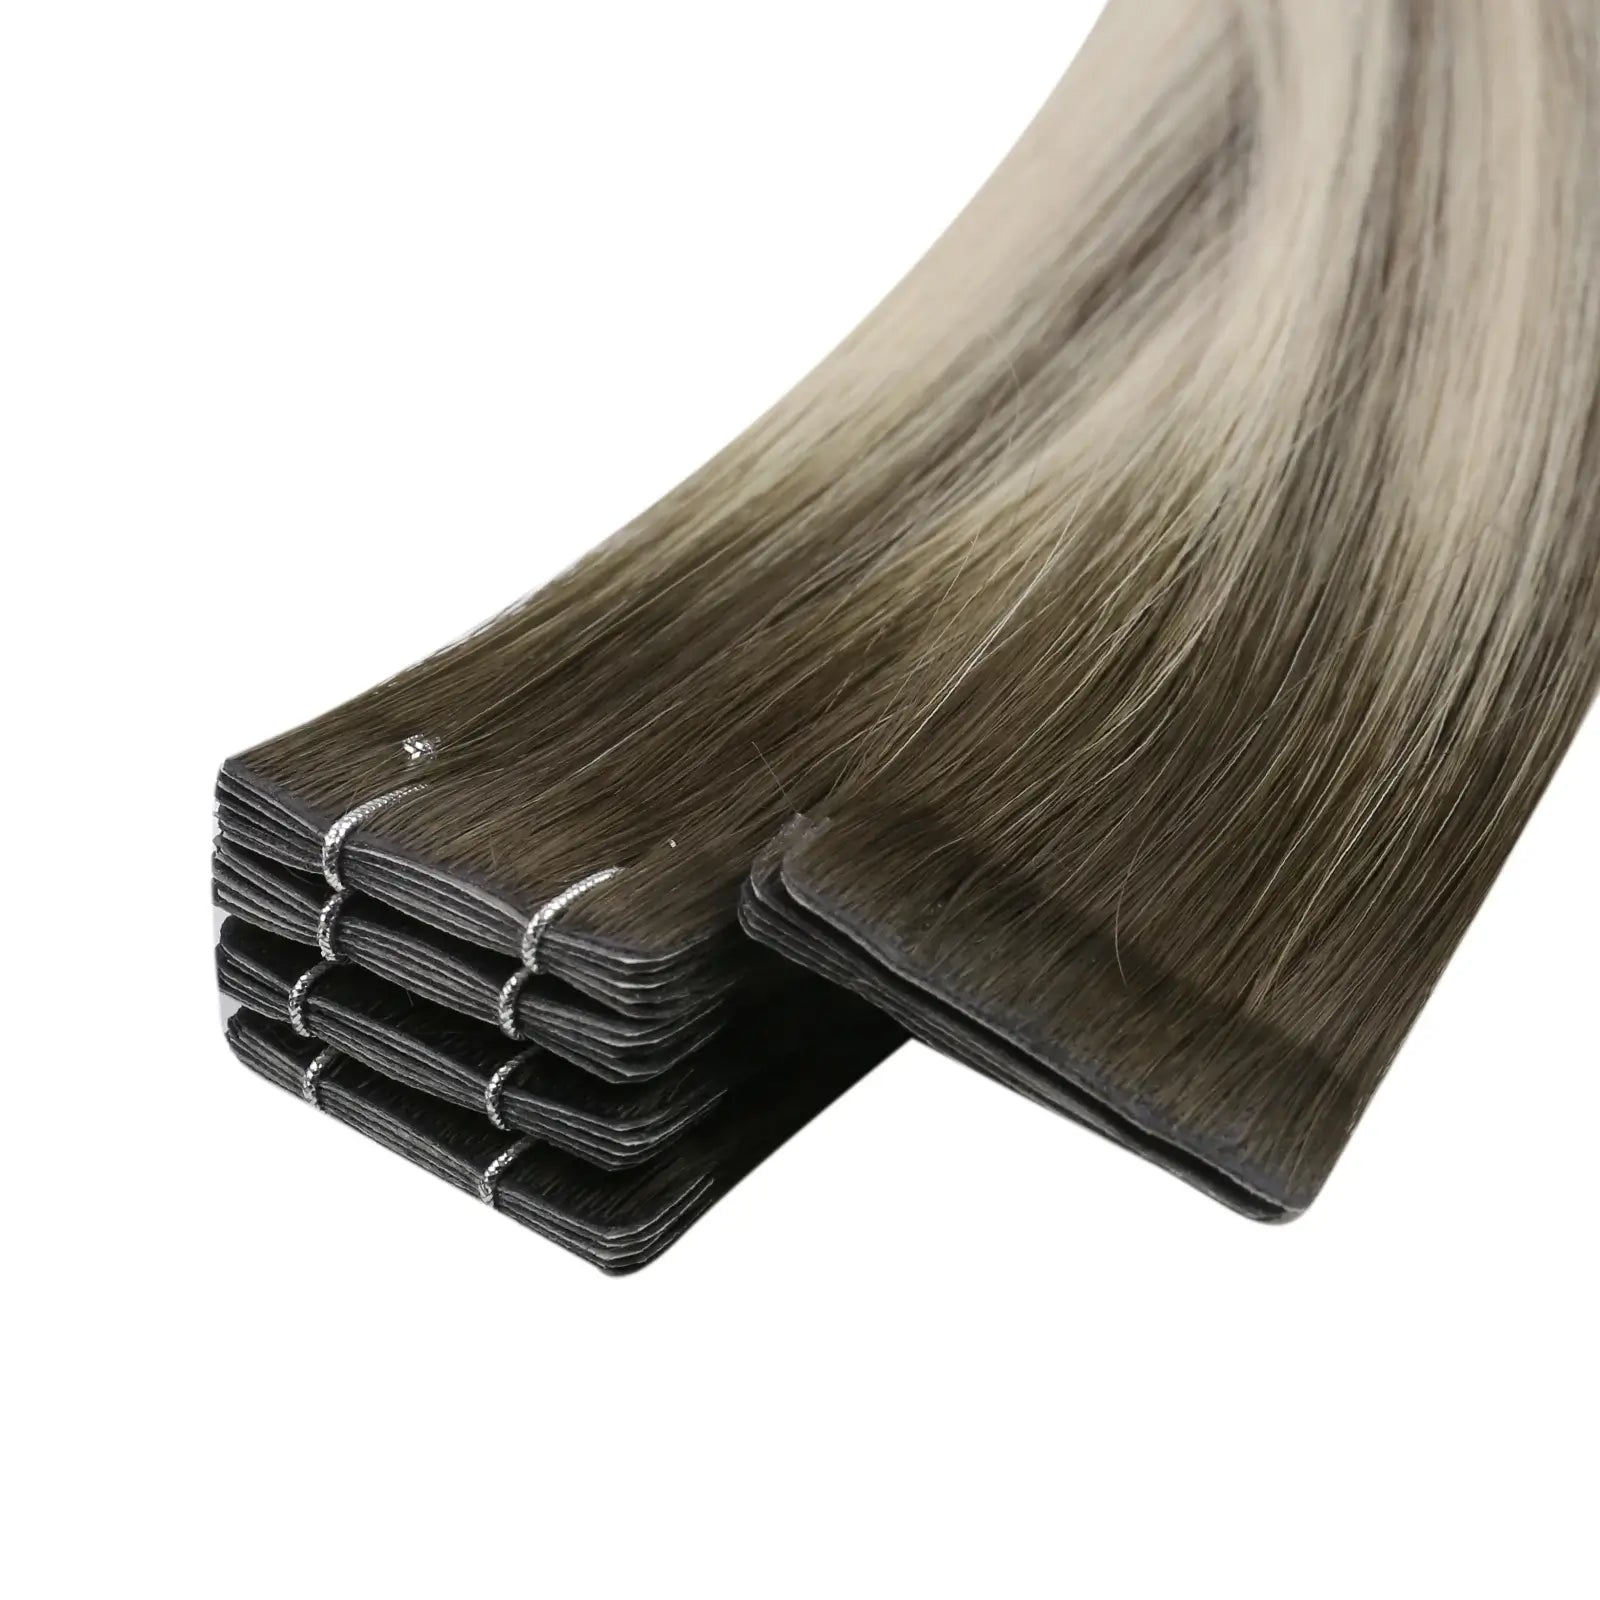 High quality tape hair extensions that last a long time for women